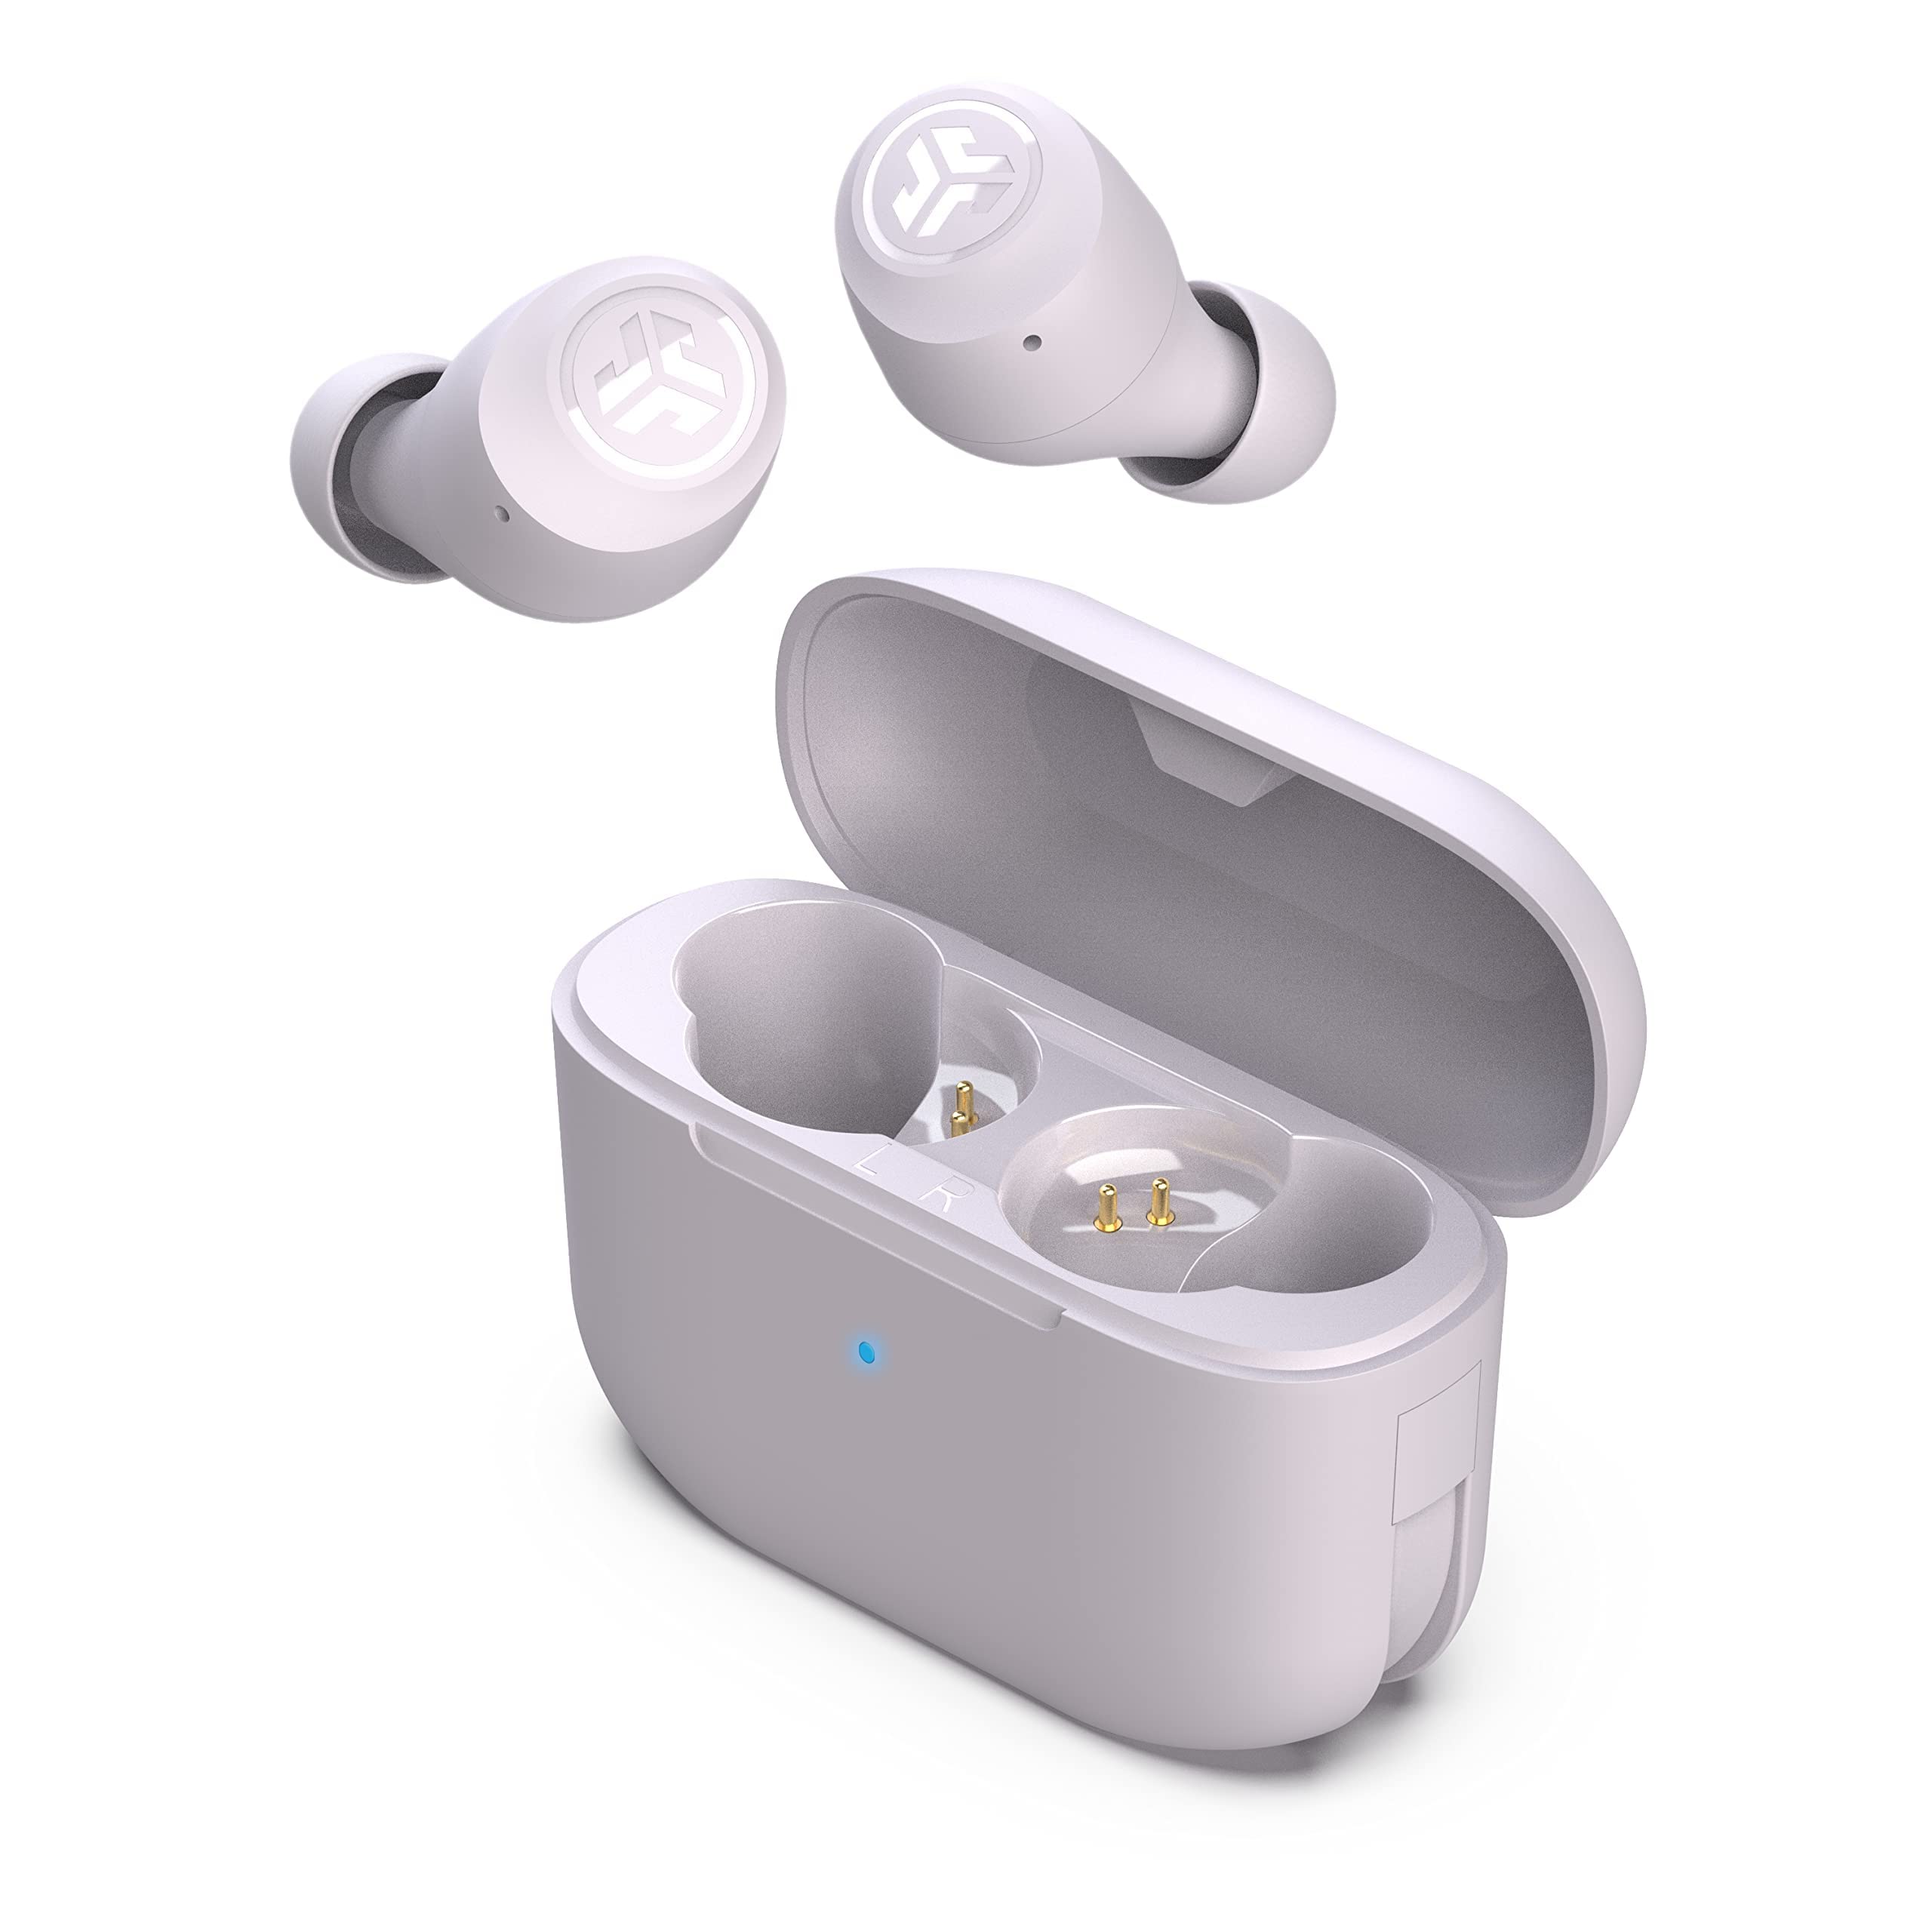 Step-by-Step Guide To Connect JLab Wireless Earbuds